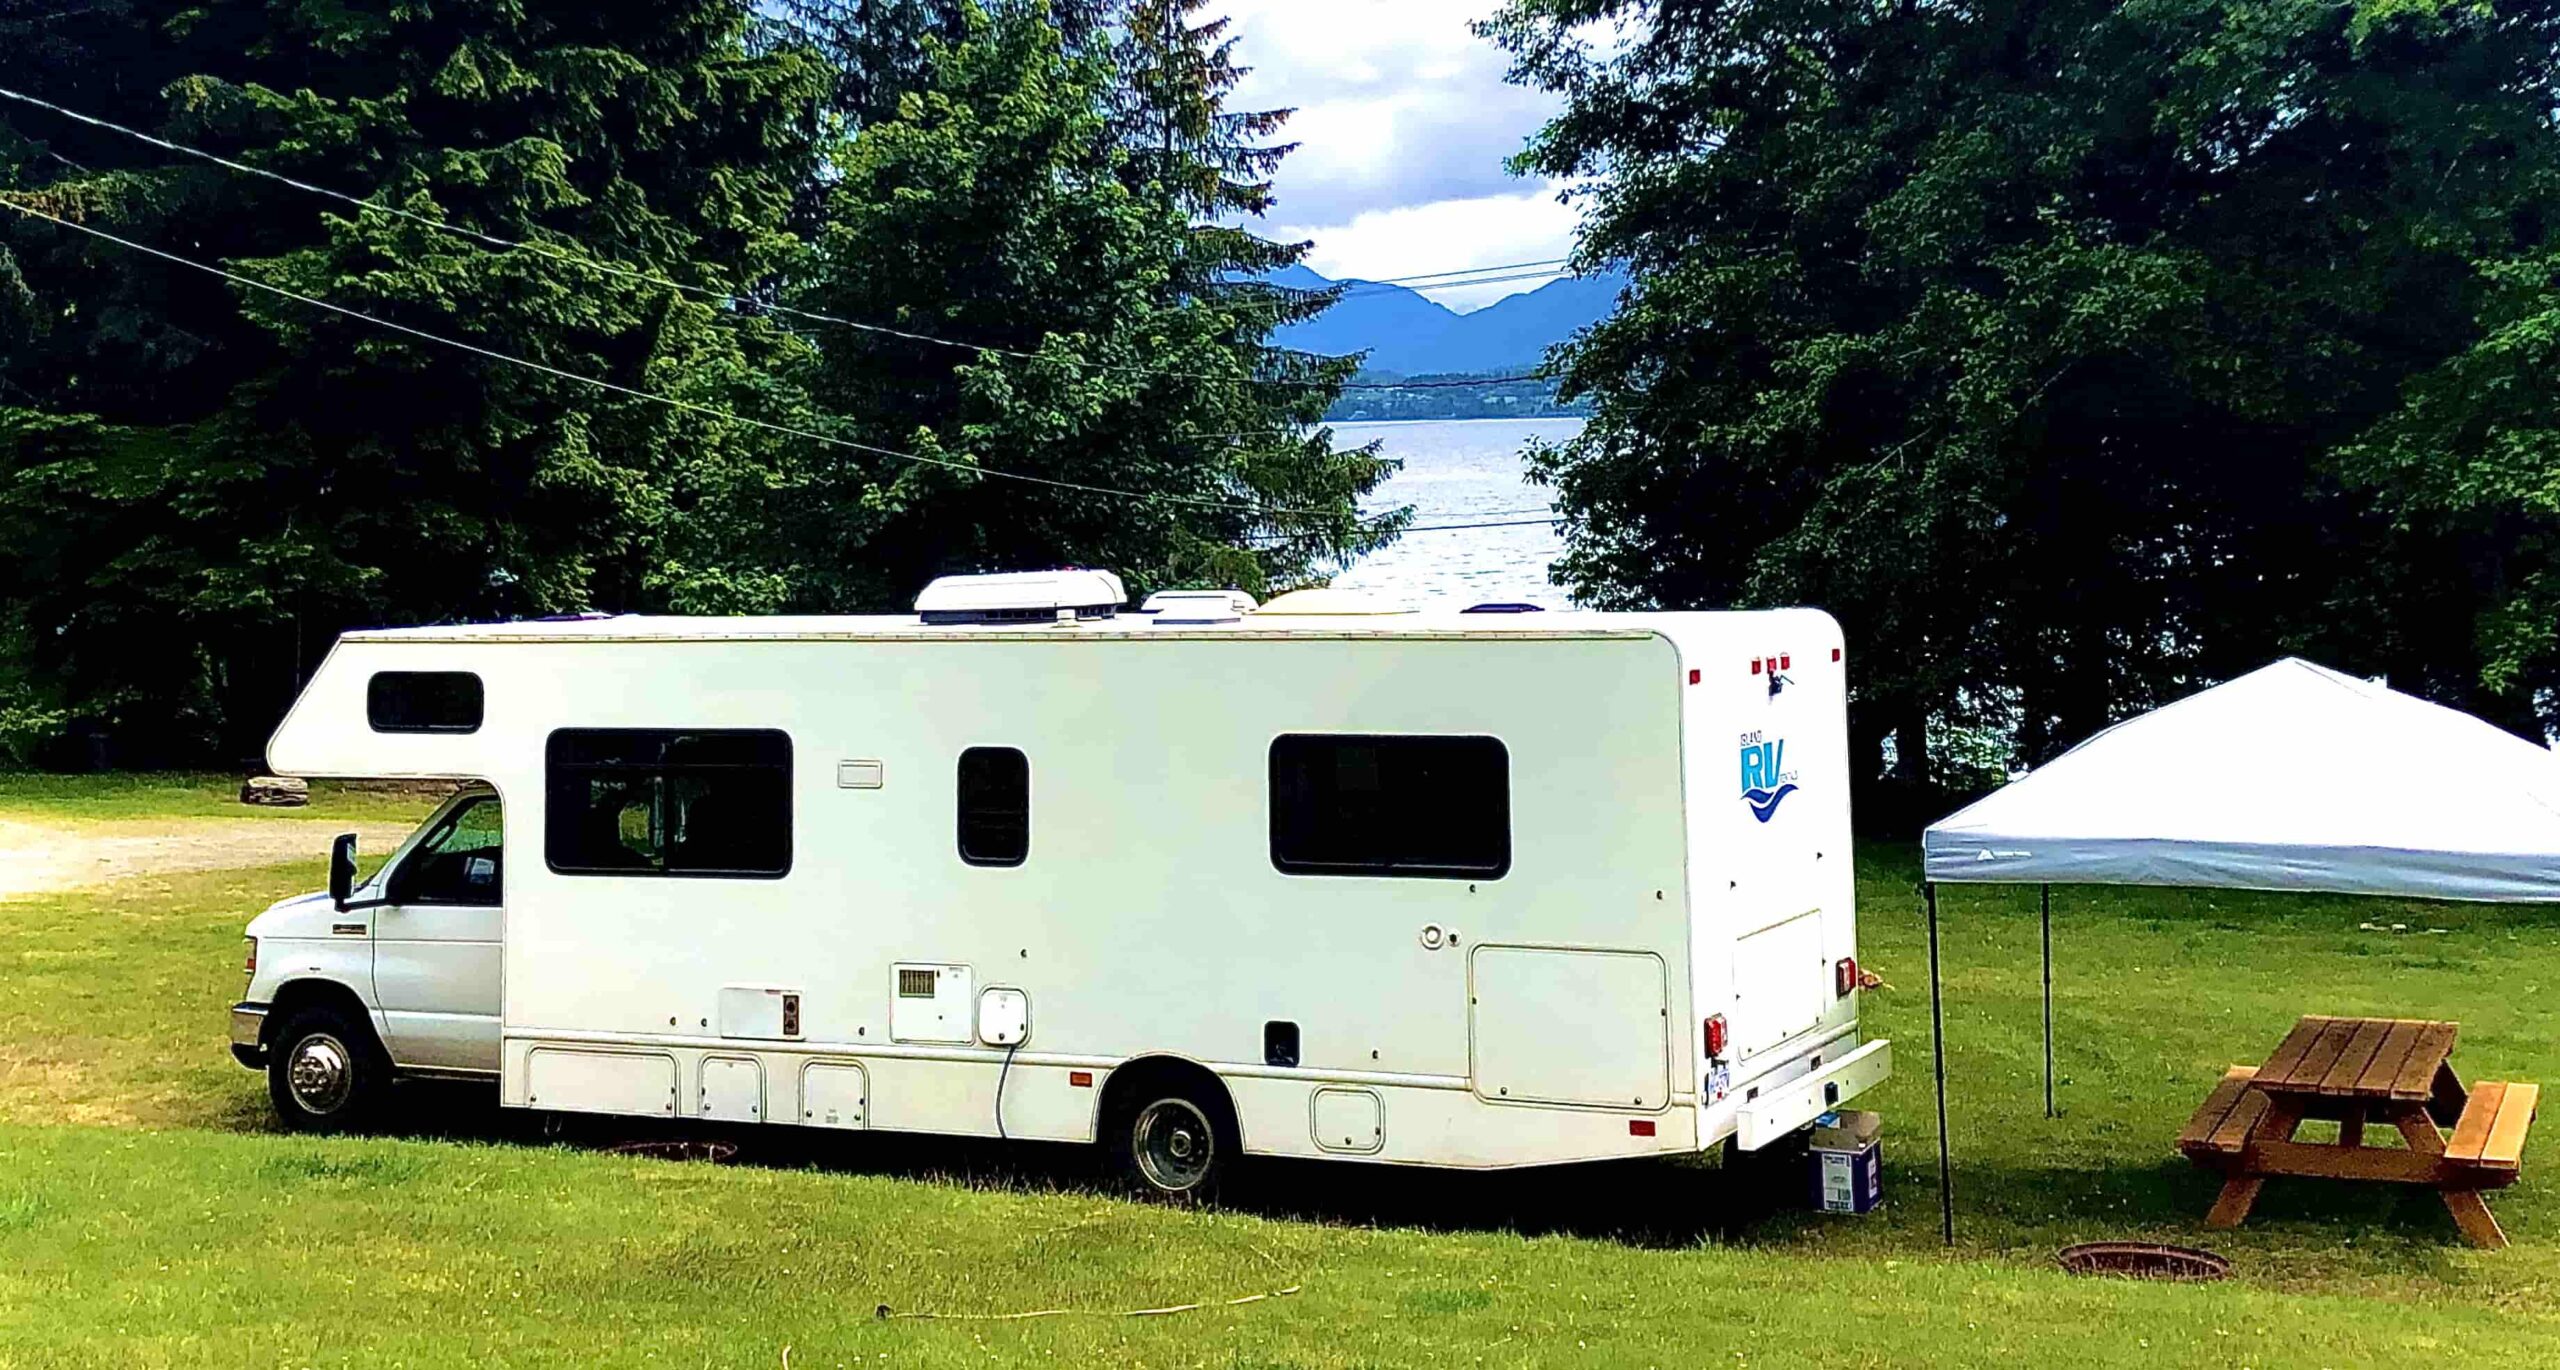 Vancouver Island RV explorer Canadian Staycations